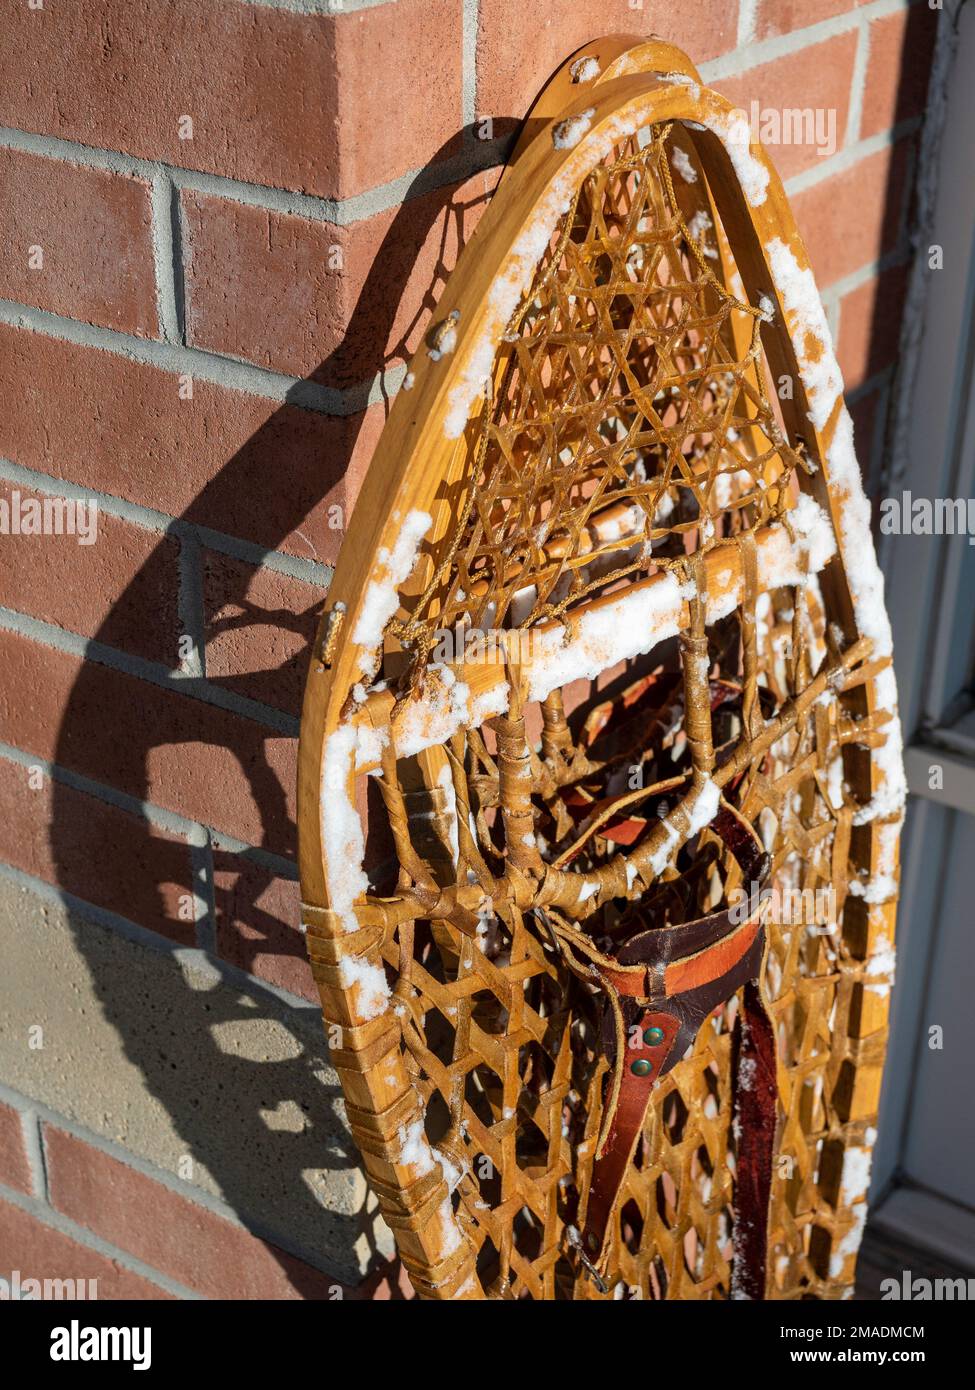 Snowshoes stacked by the front door closeup: A pair of traditional snowshoes stacked in a sunny spot by the front door of a house.  The shoes are still covered with snow. Stock Photo